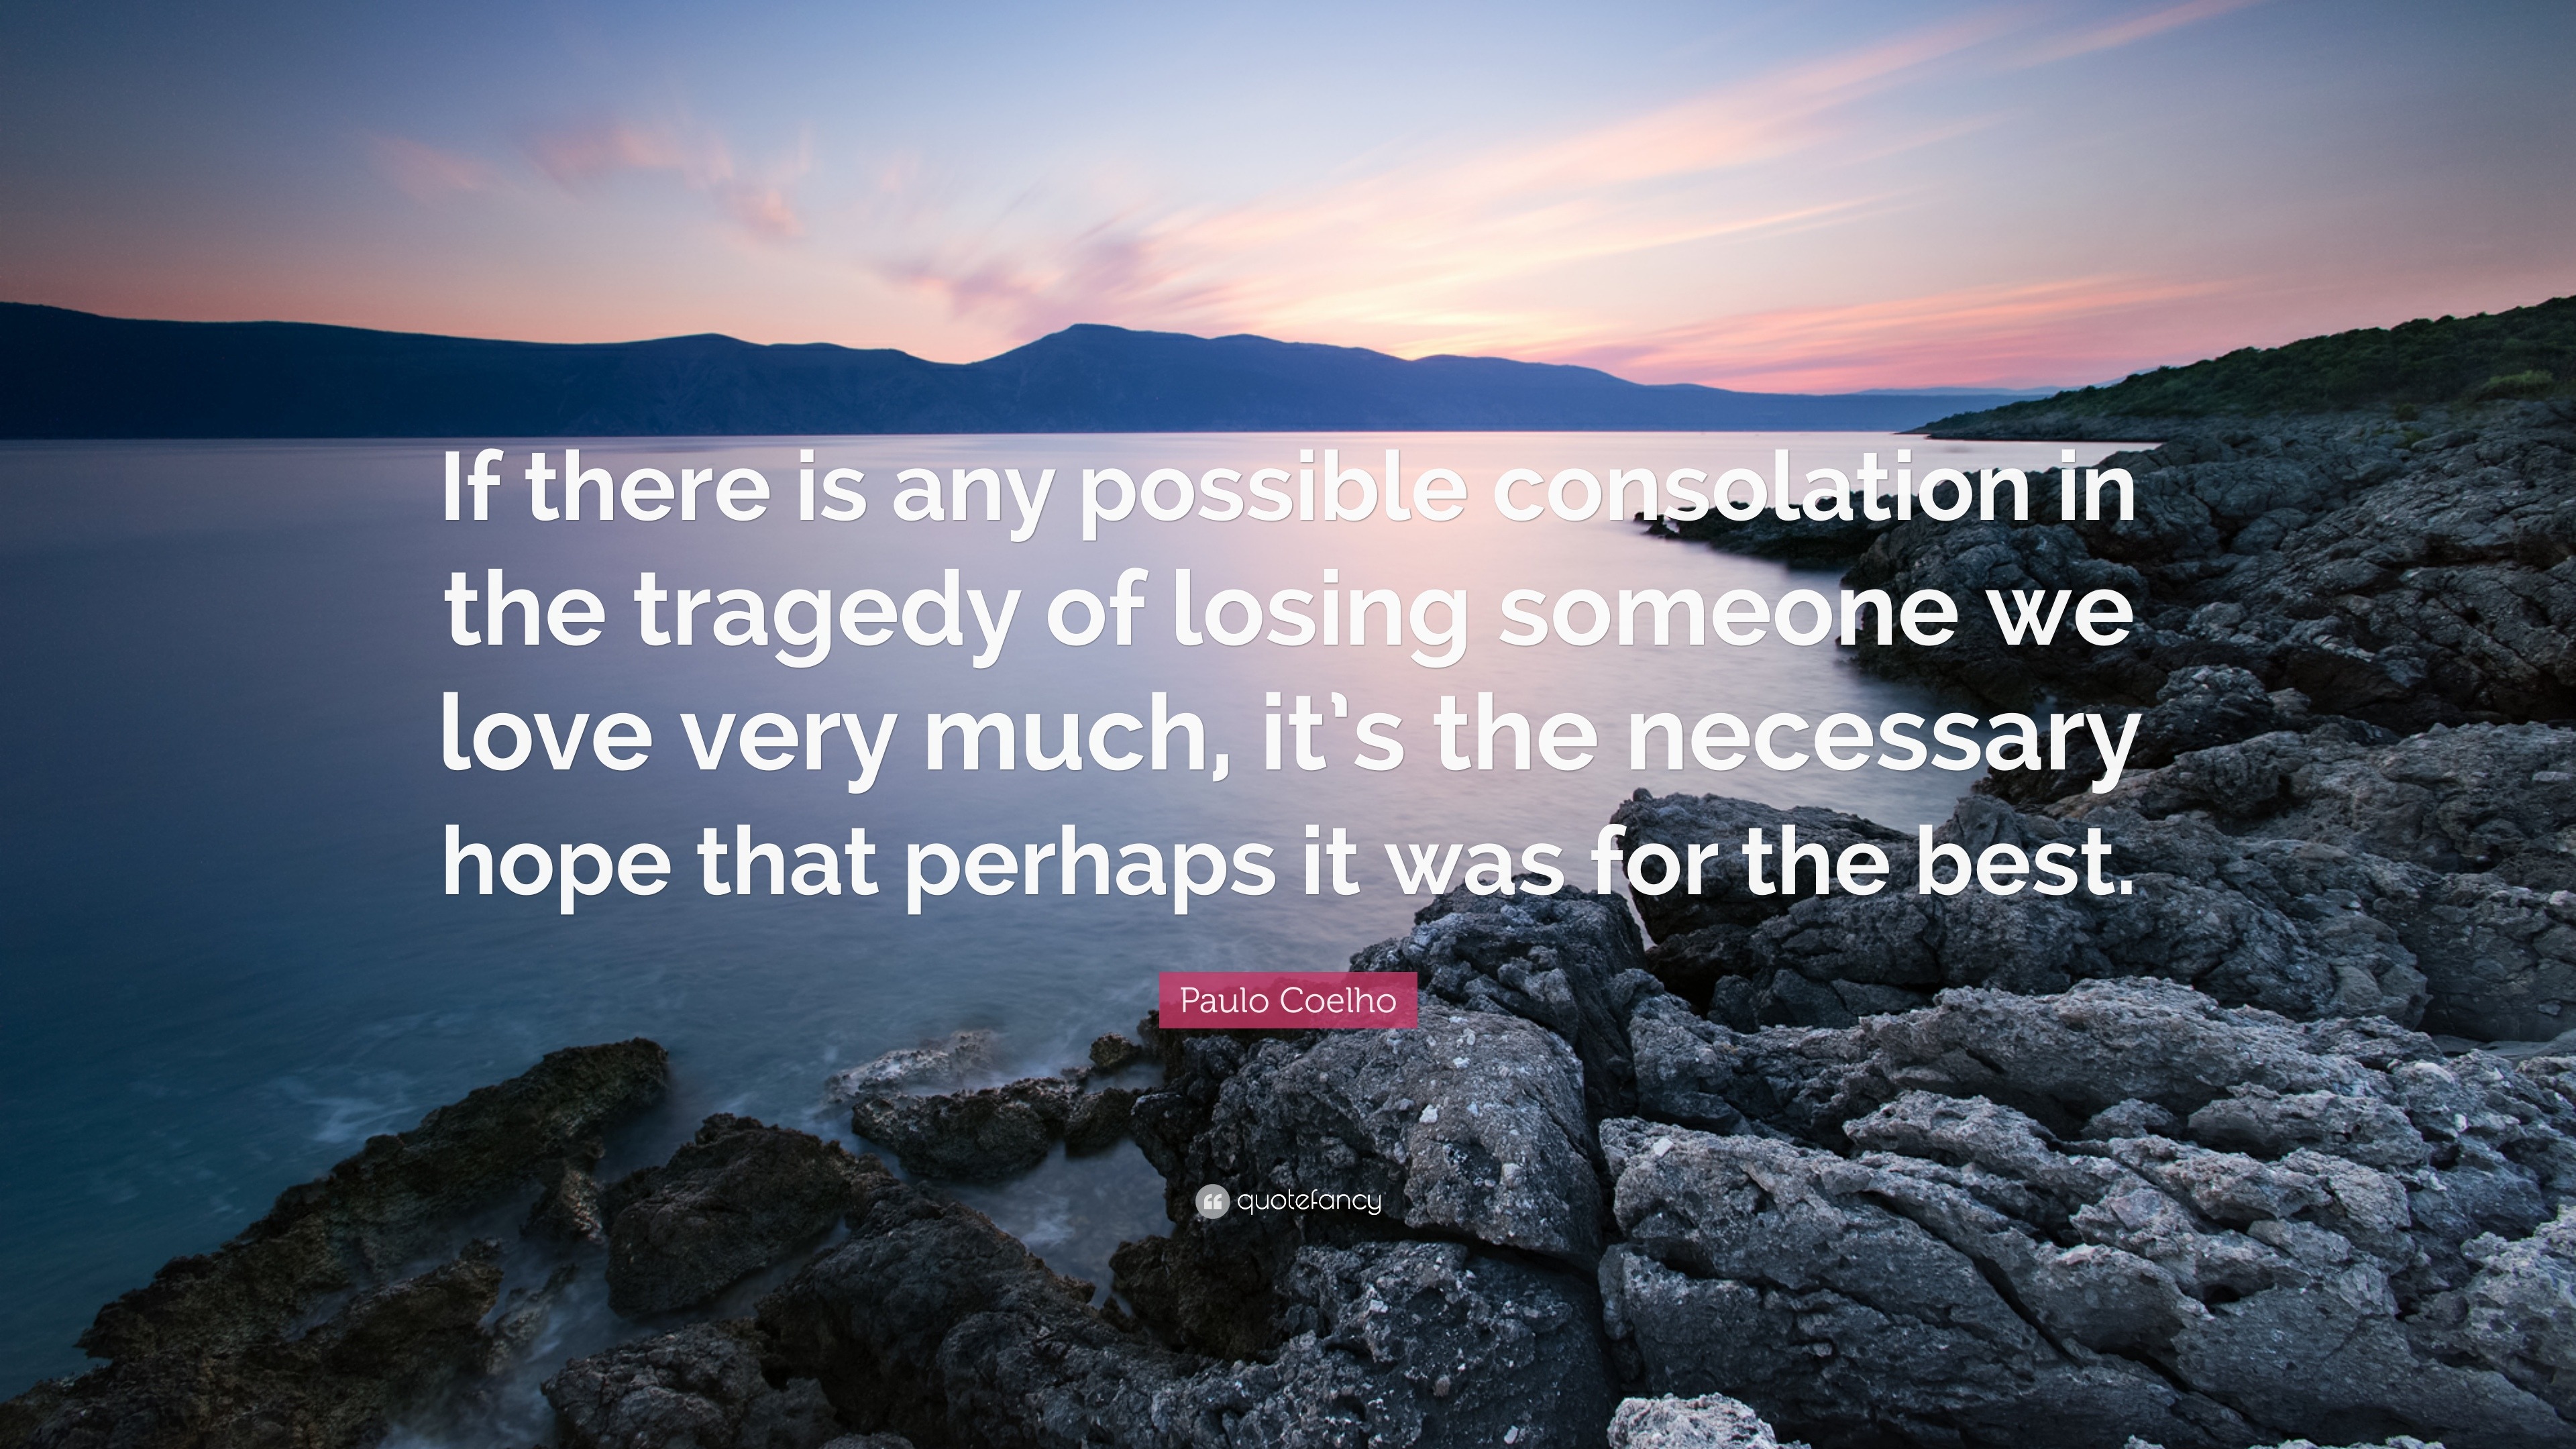 Paulo Coelho Quote: “If there is any possible consolation in the ...